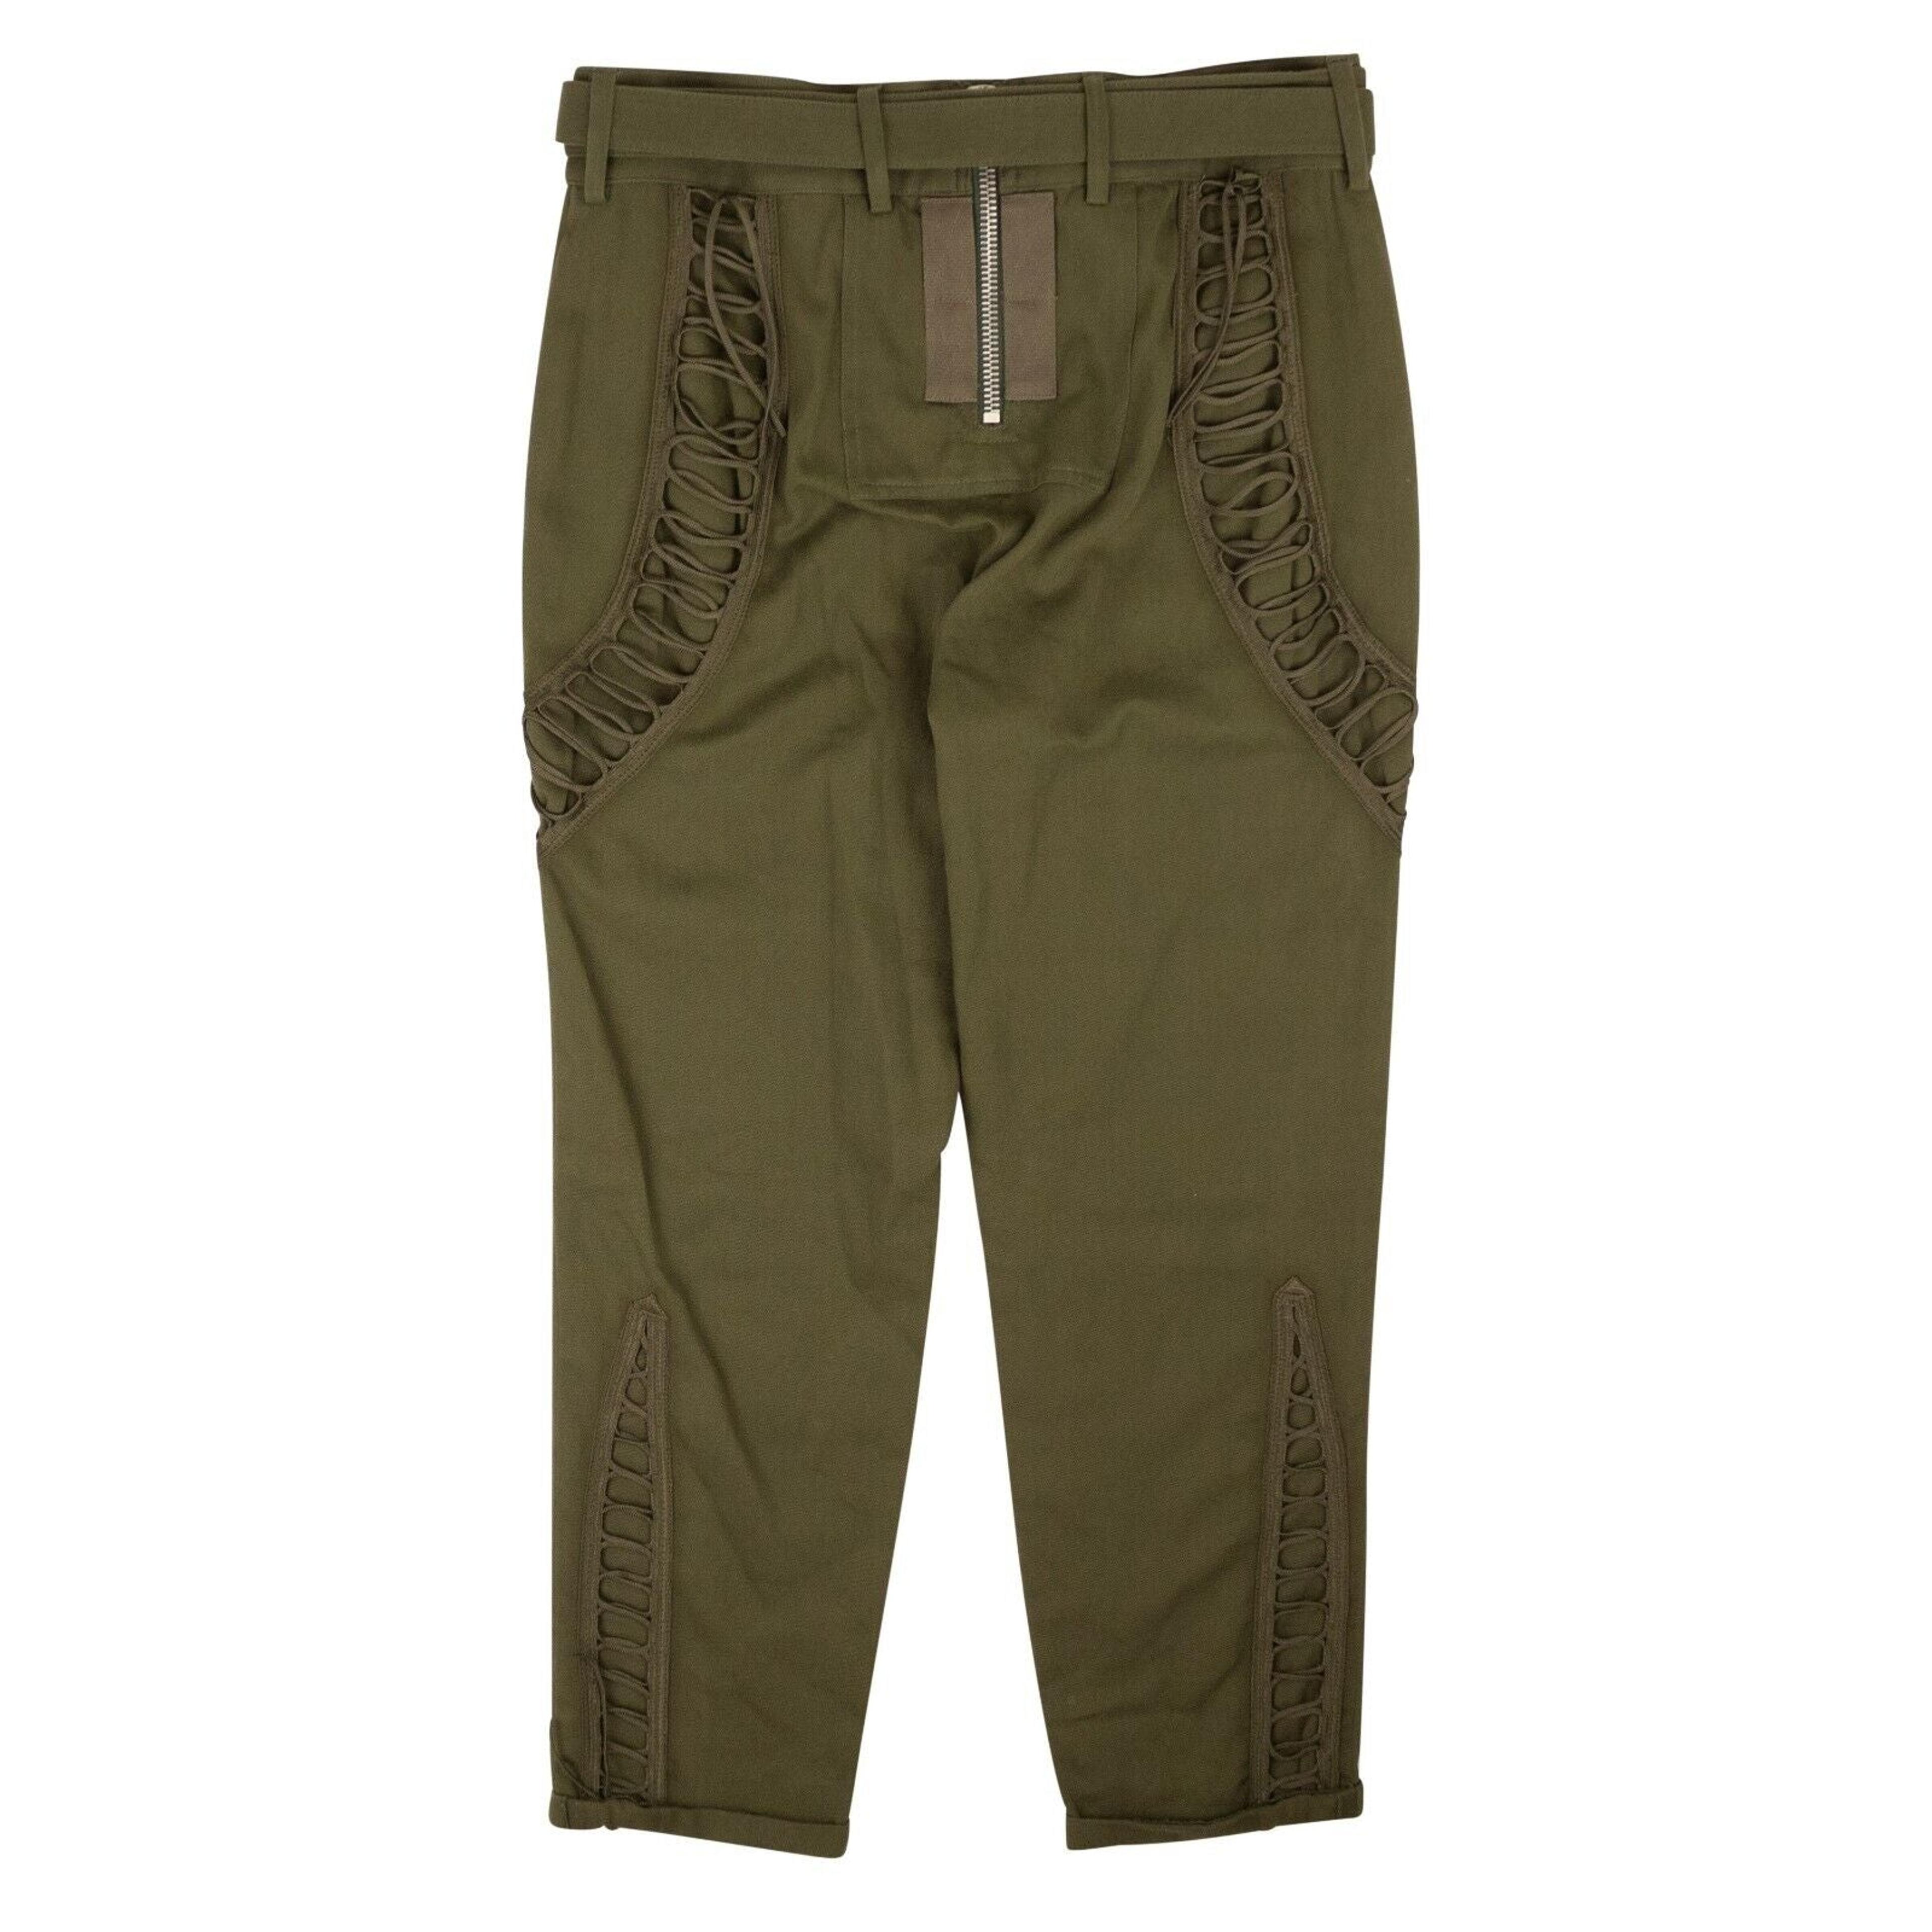 Alternate View 3 of Women's Green Lace-Up Military Pants